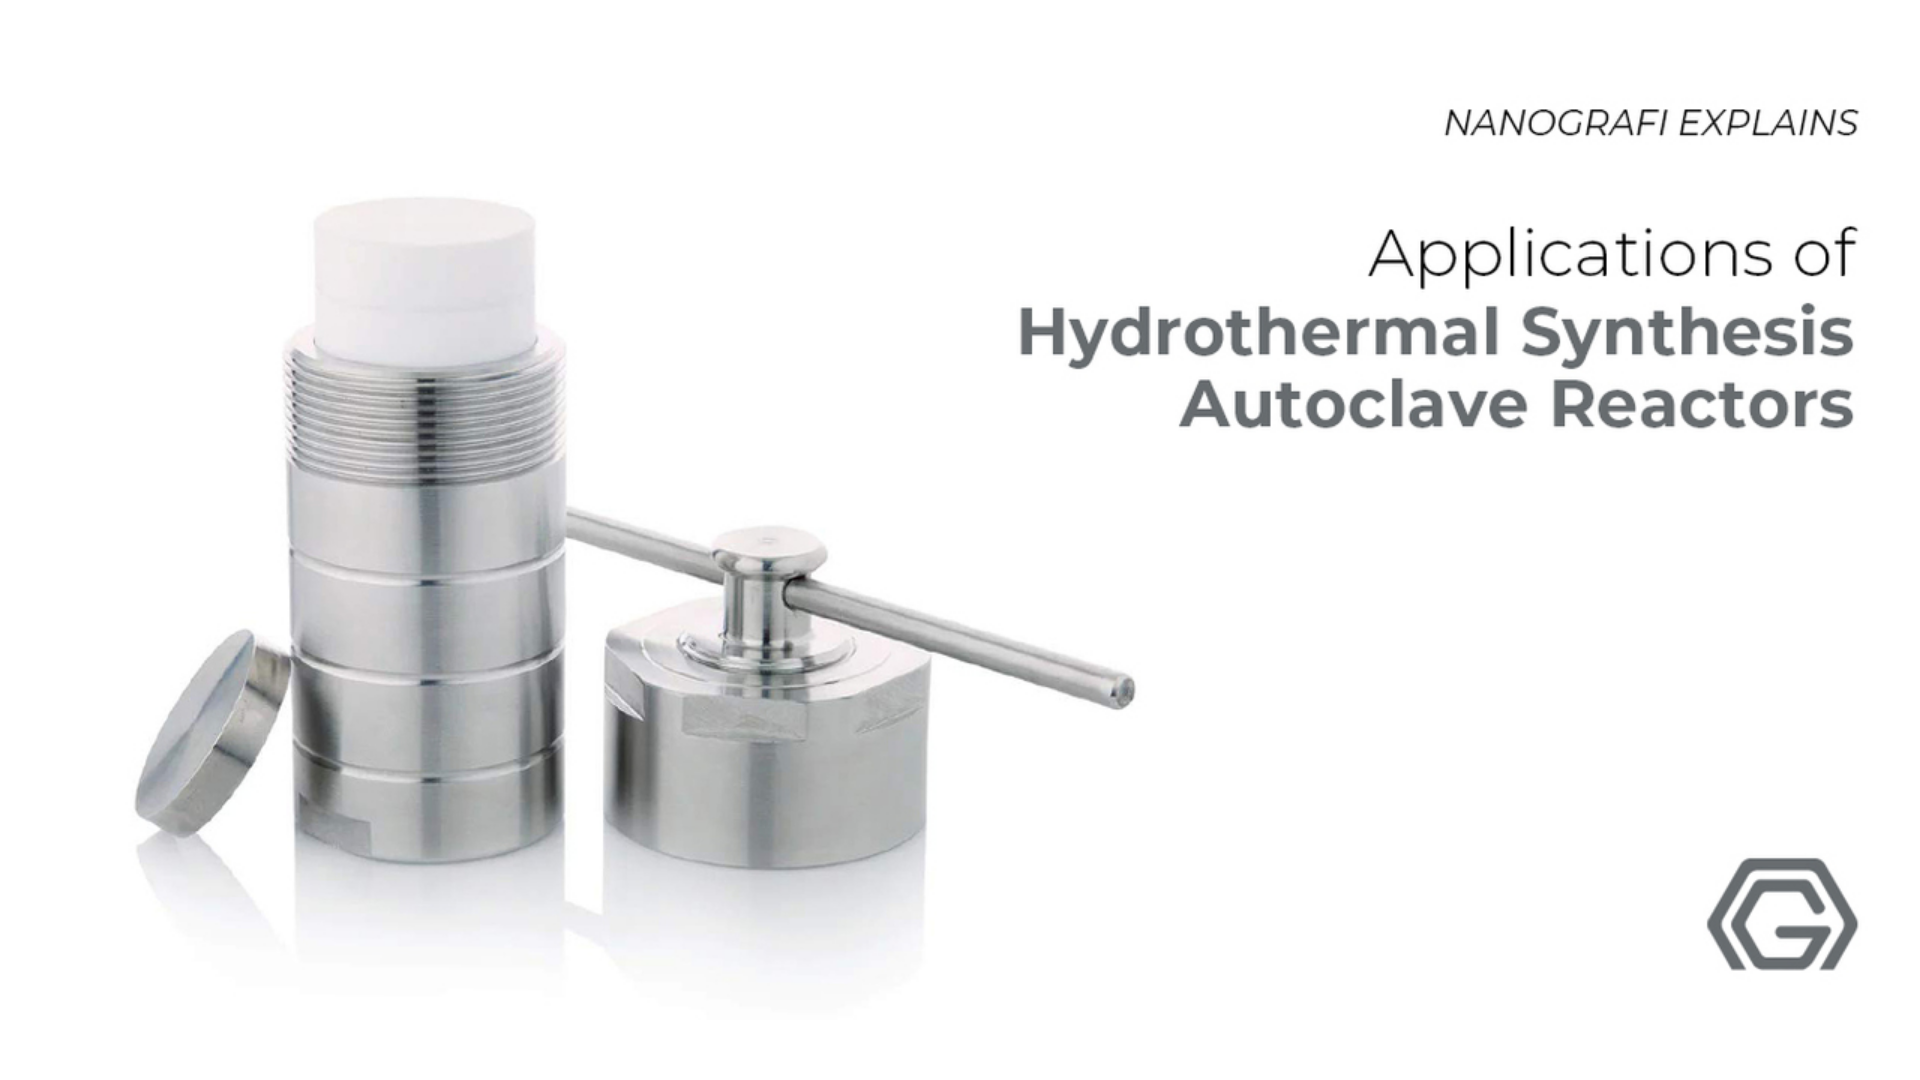 Applications of Hydrothermal Synthesis Autoclave Reactors